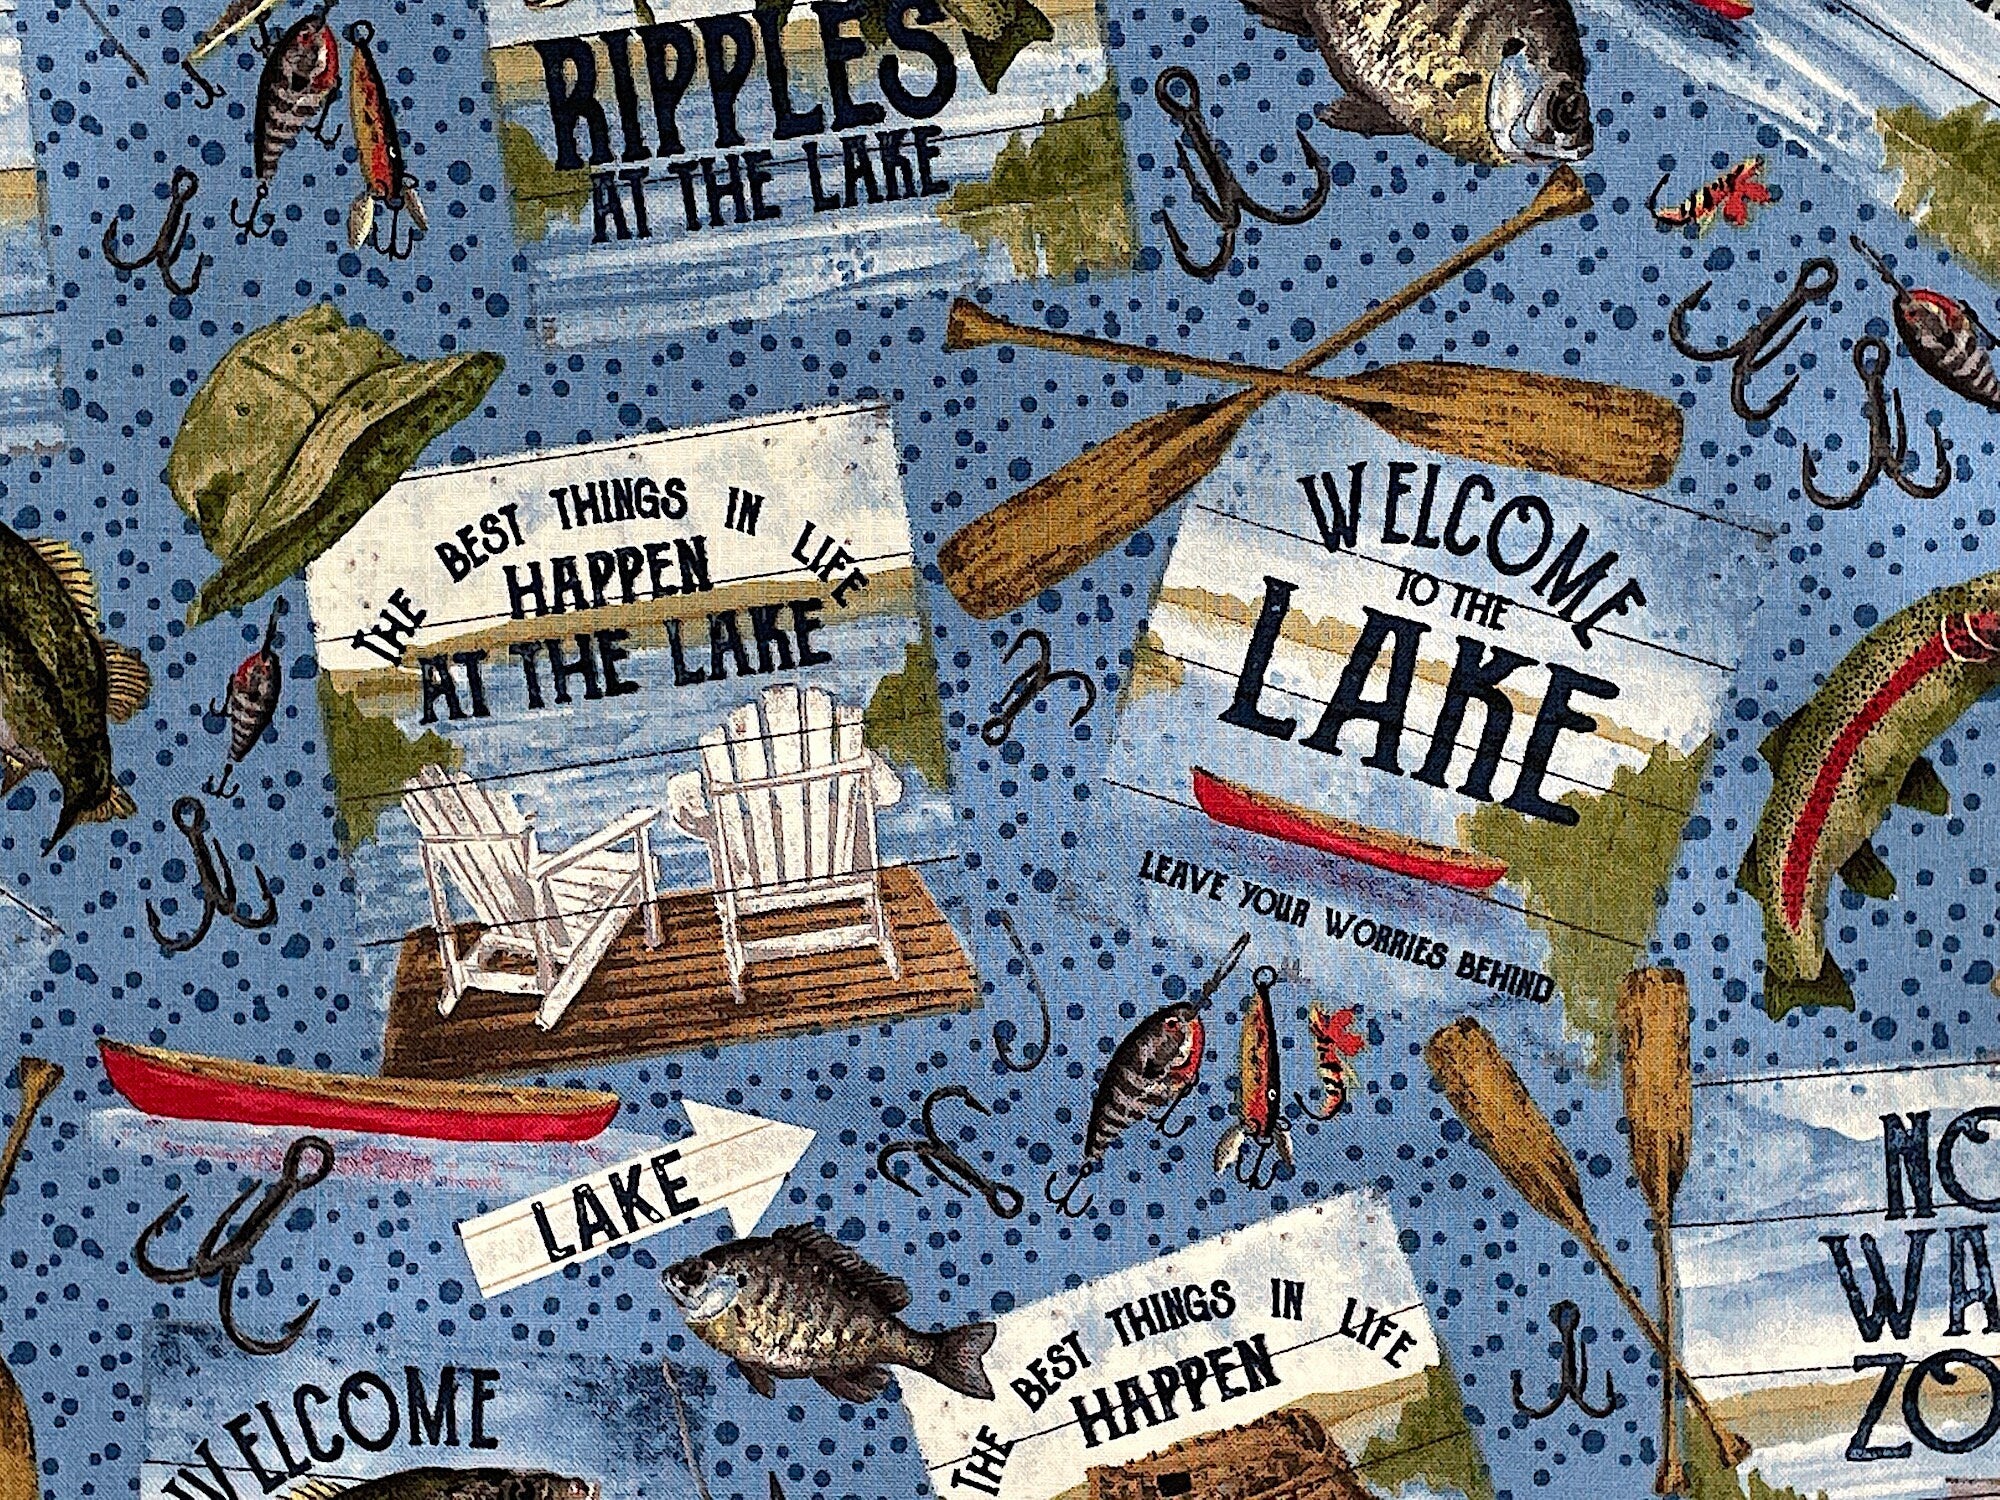 Close up of Welcome to the Lake leave your worries behind and The Best Things in life happen at the lake.